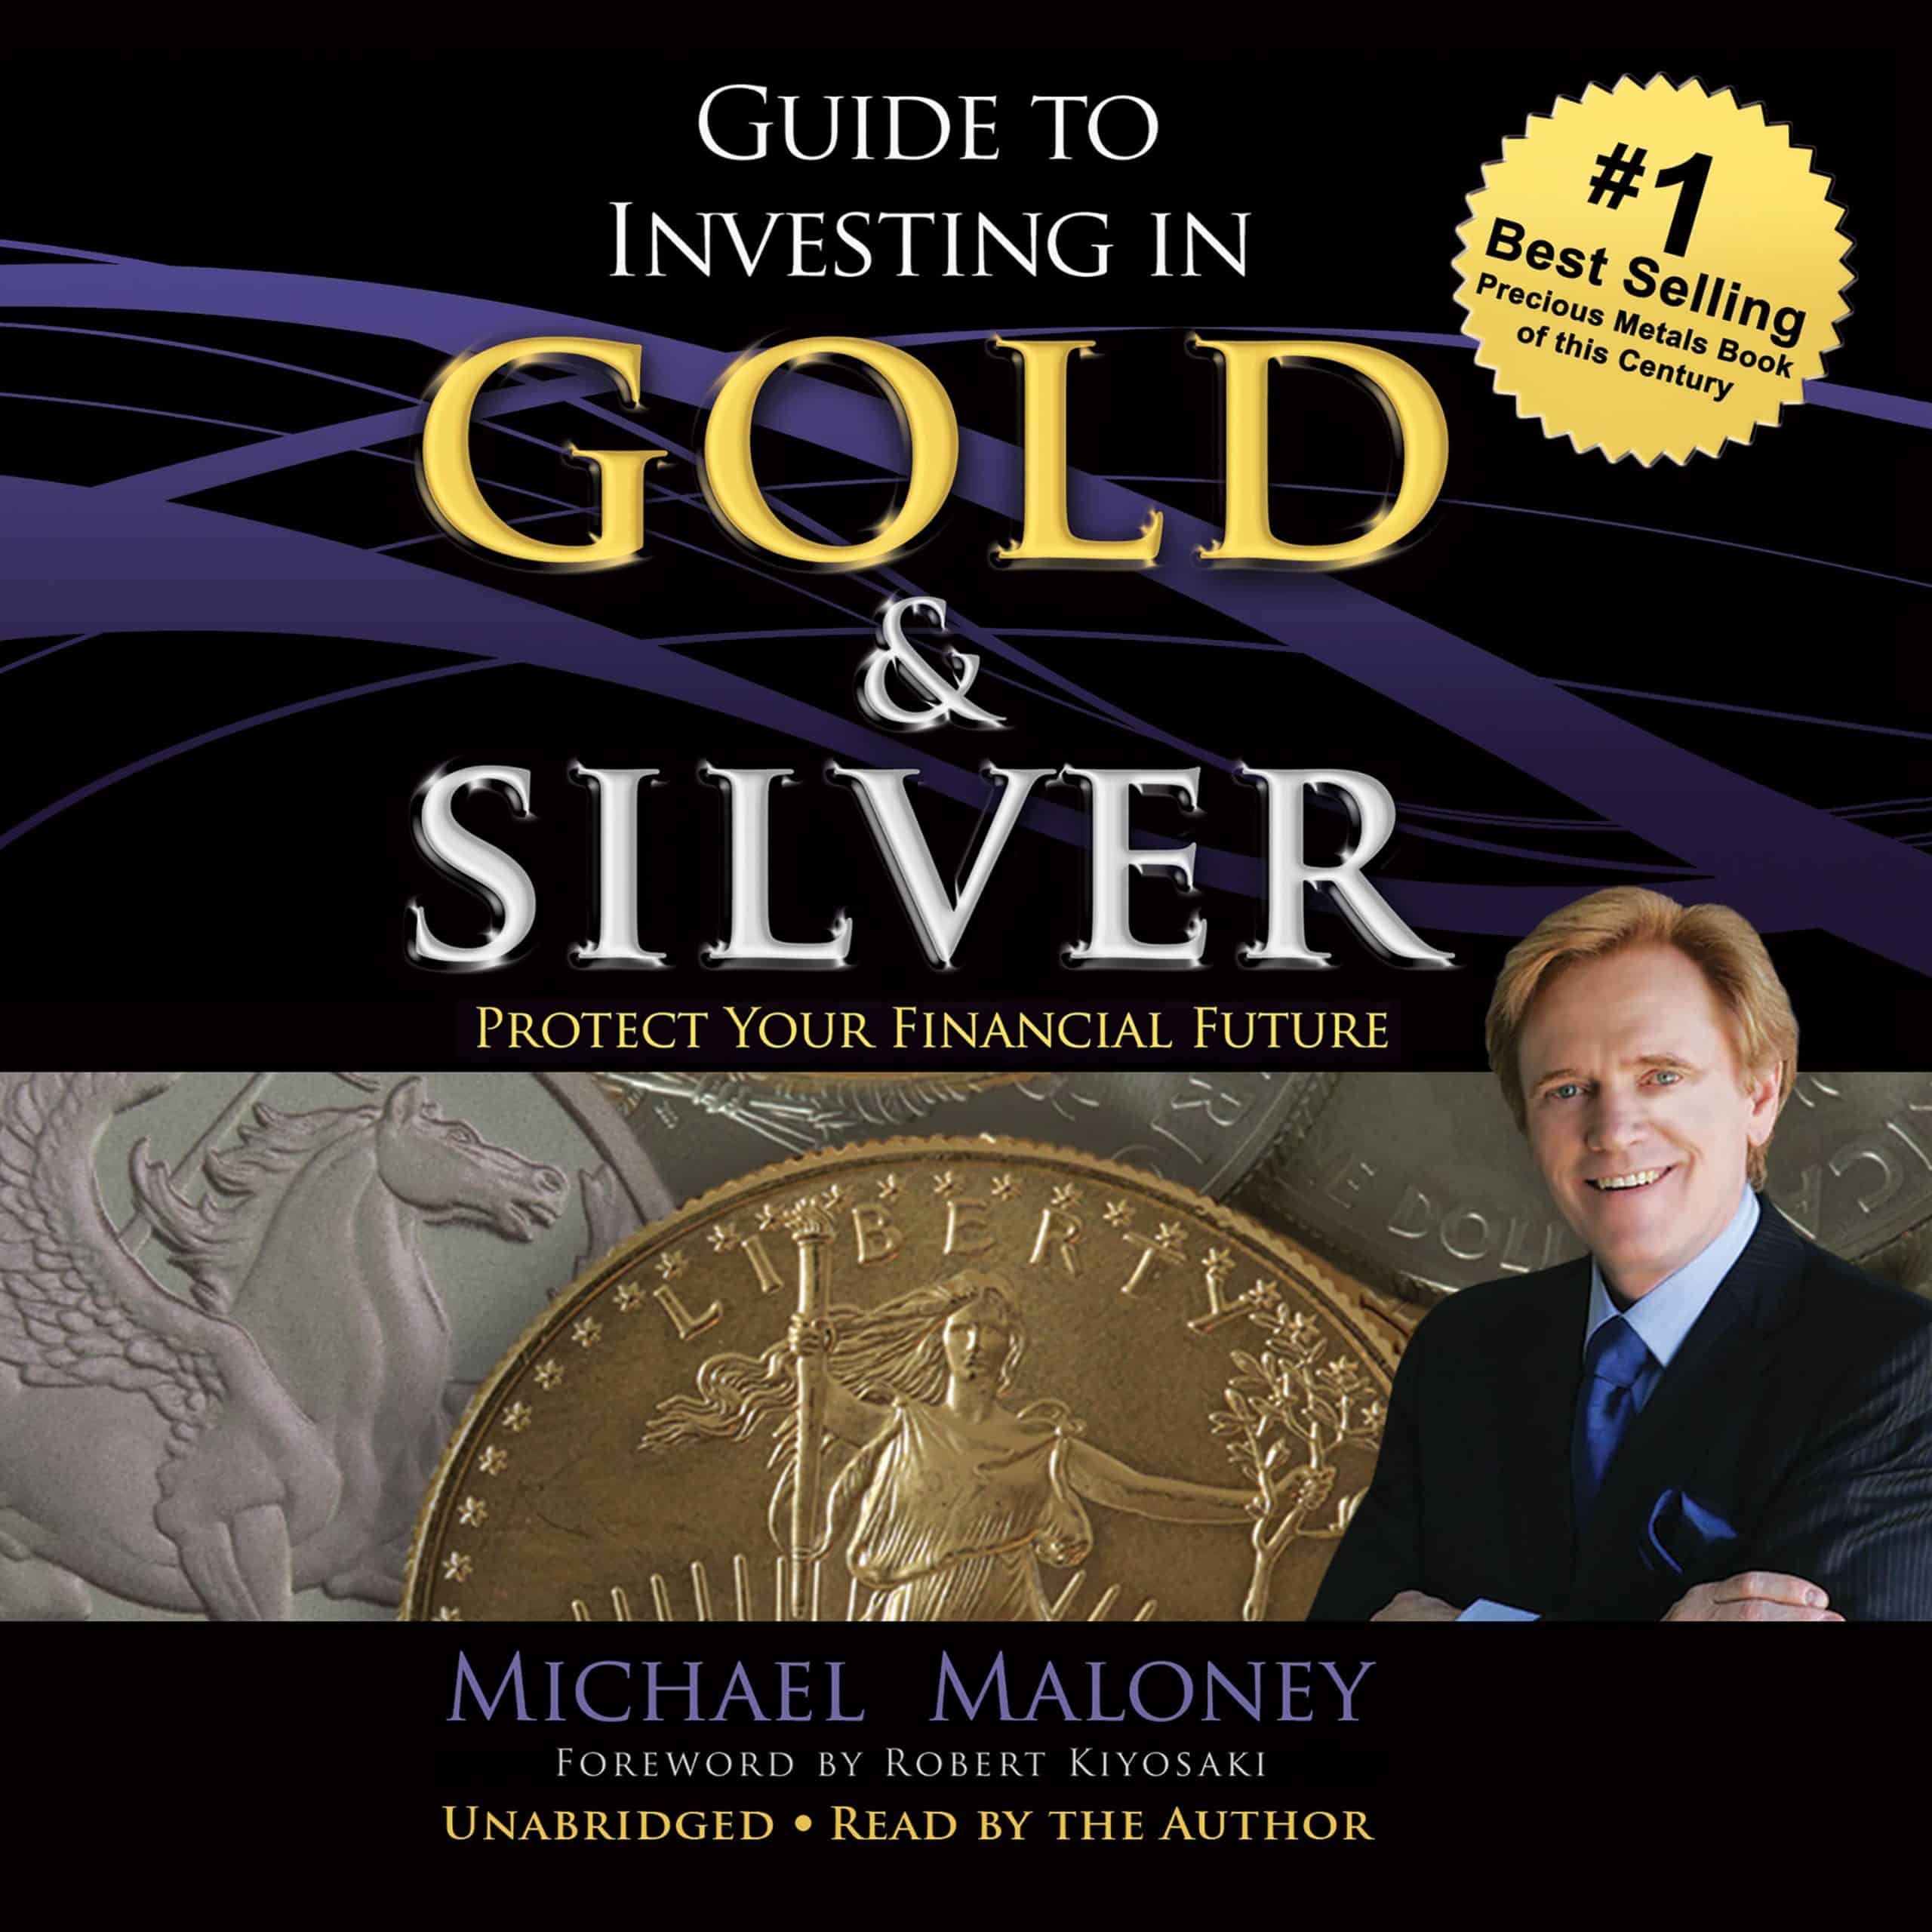 Guide to Investing in Gold and Silver